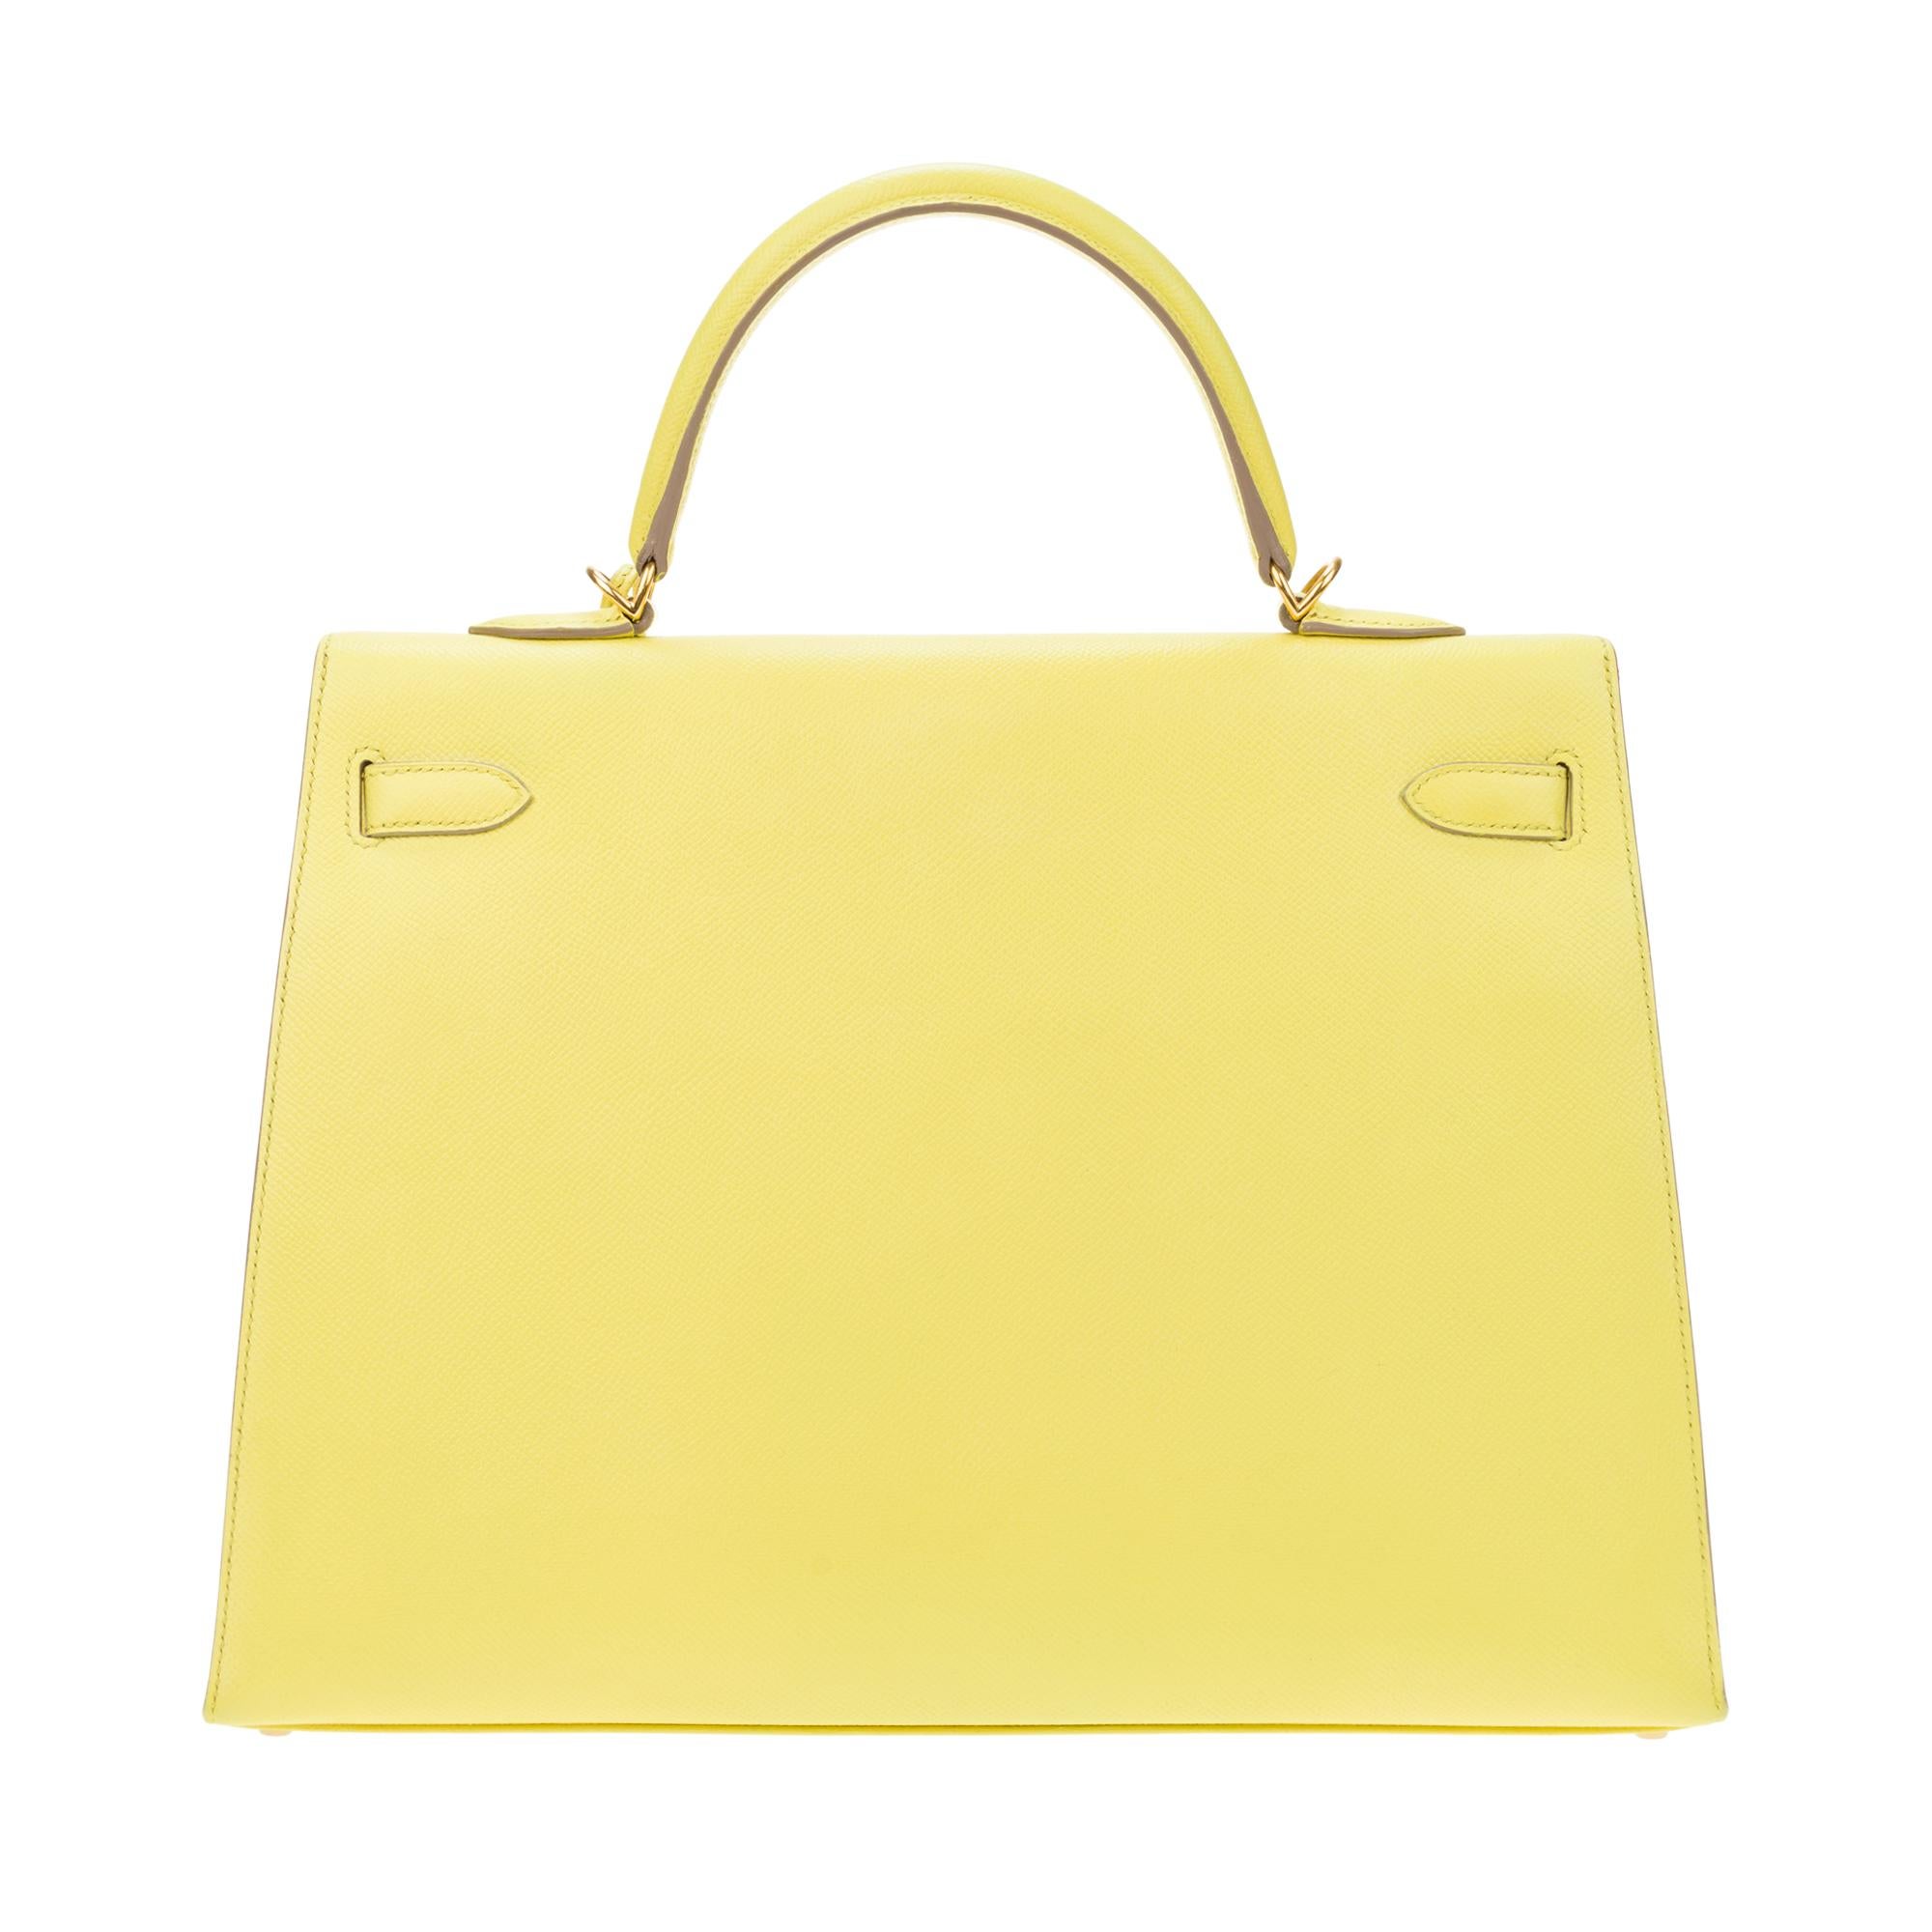 Stunning and Rare Hermes Kelly 35 cm lemon yellow Epsom leather handbag, gold metal trim, saddle stitches, yellow leather handle, removable shoulder strap handle in yellow leather for hand or shoulder support.

Shut down by flap.
Inside lining in